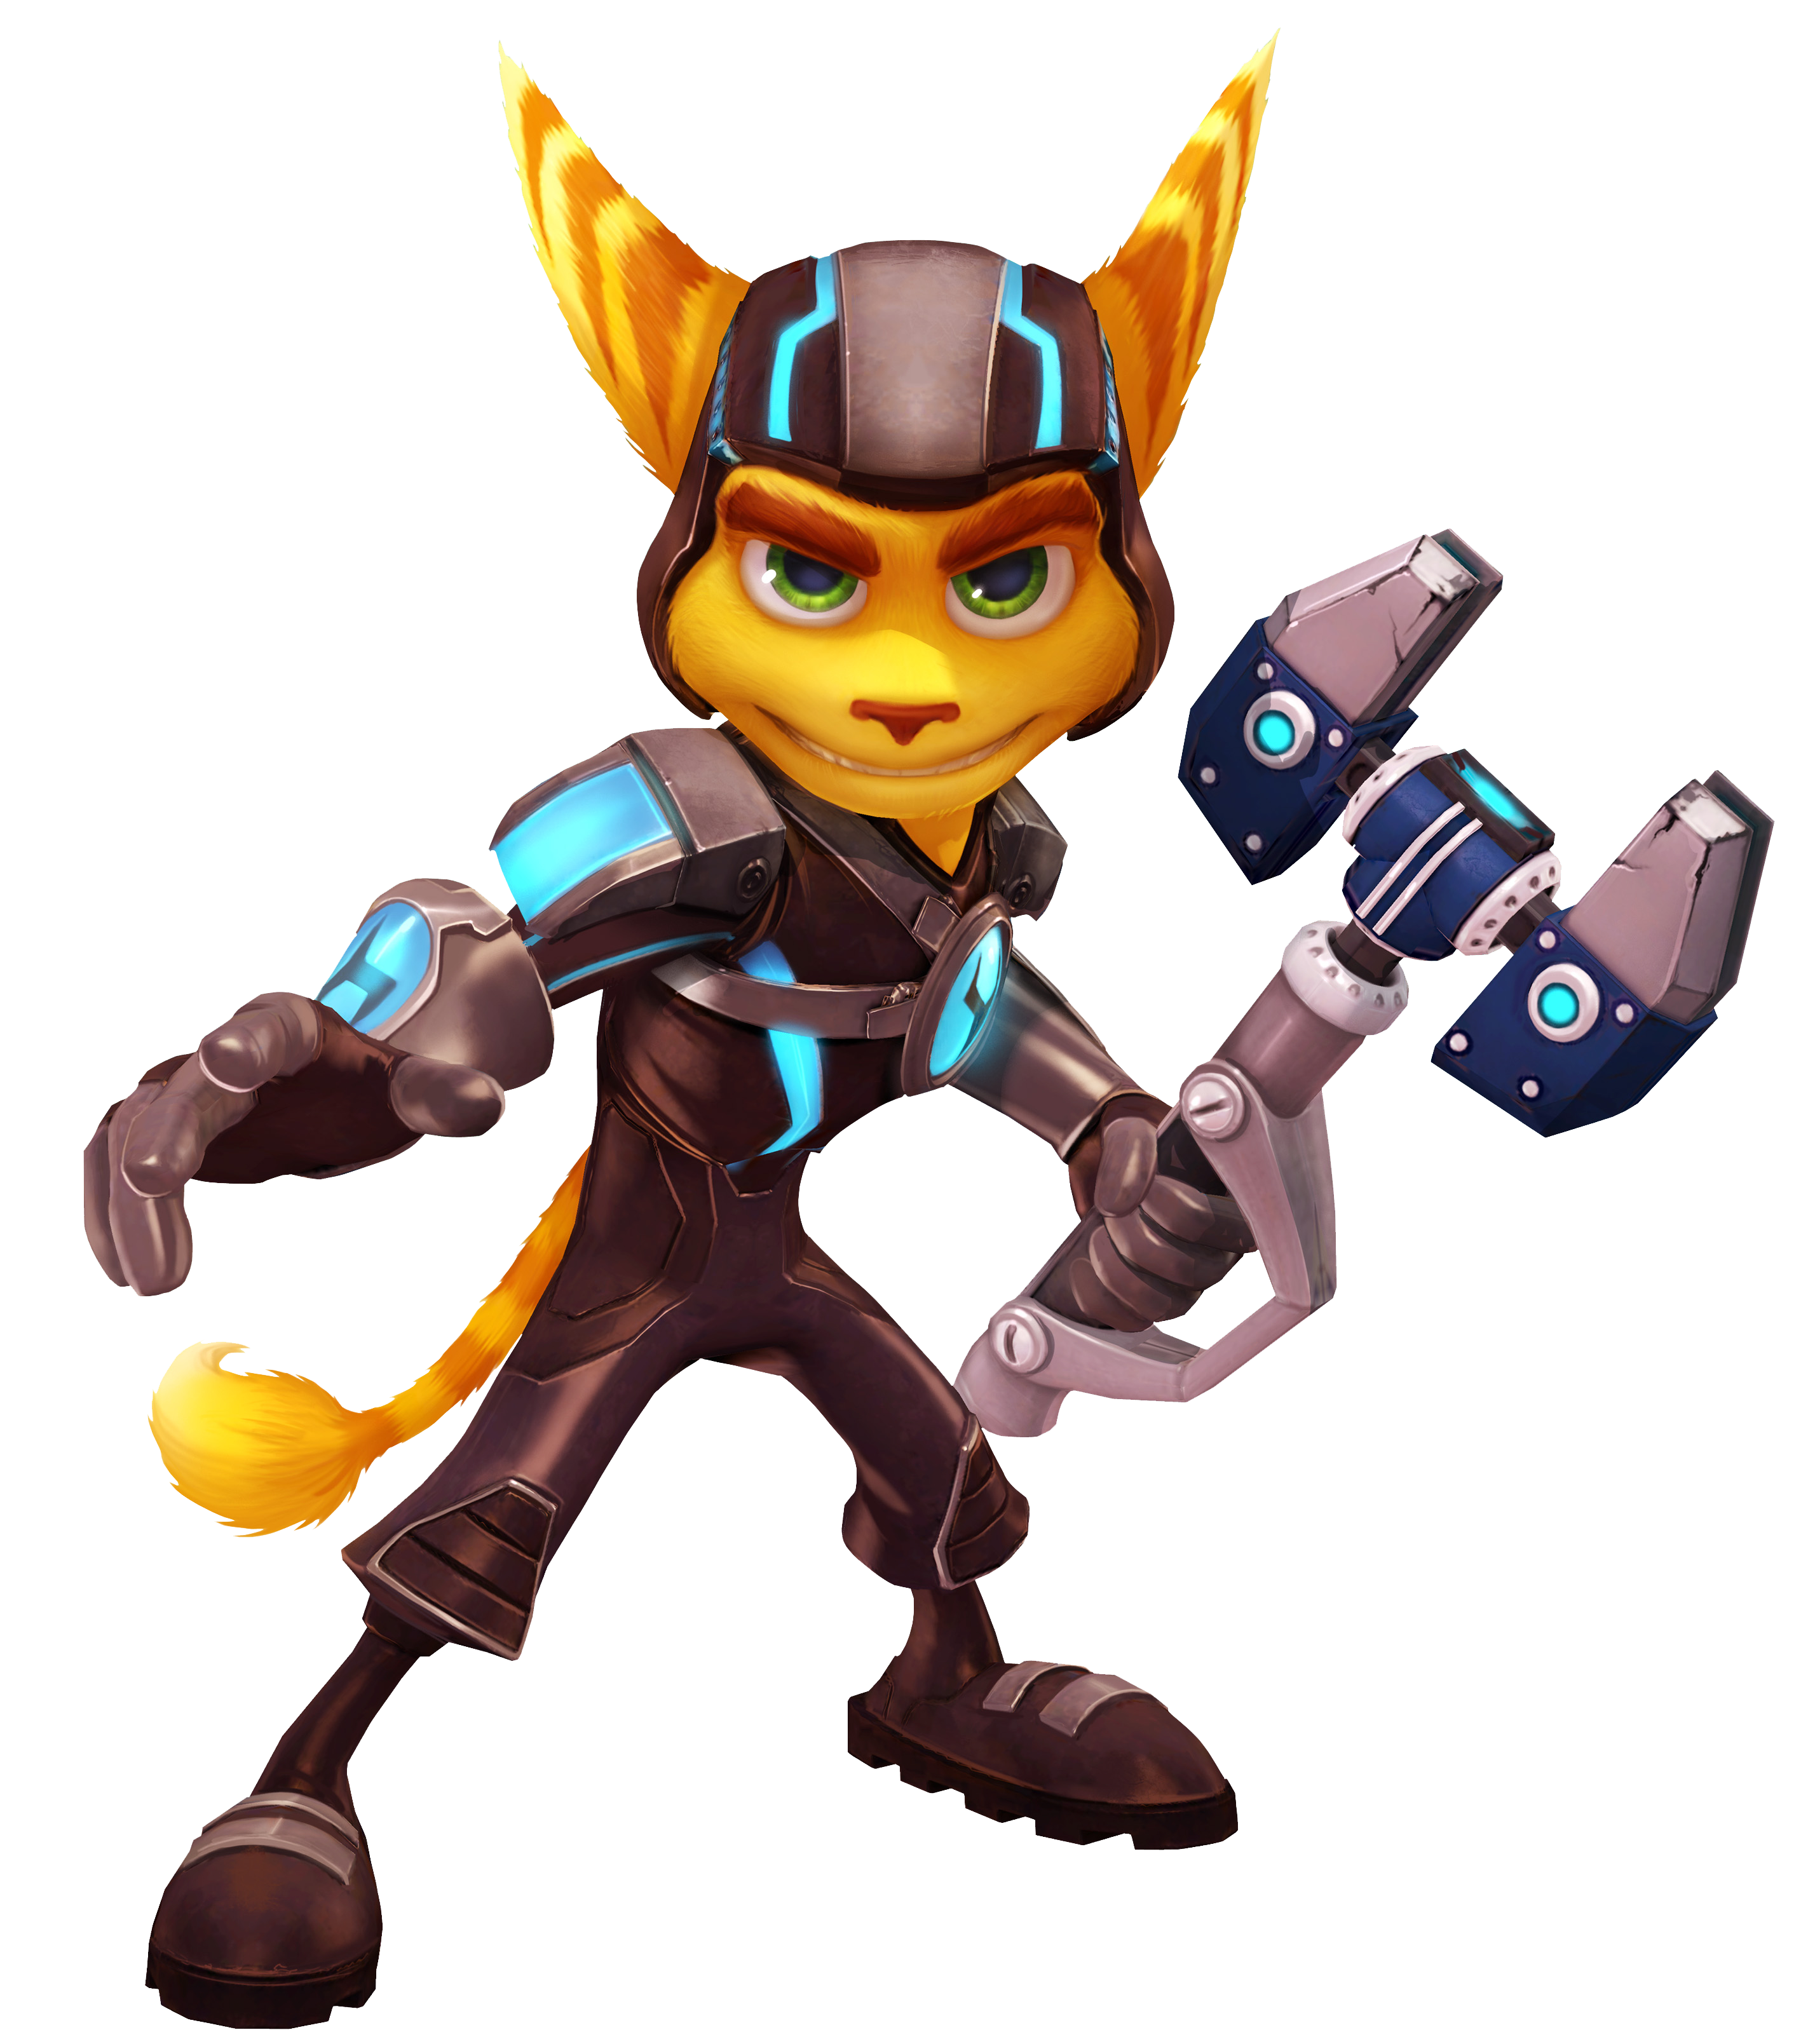 Ratchet & Clank (2016 video game) - Wikipedia